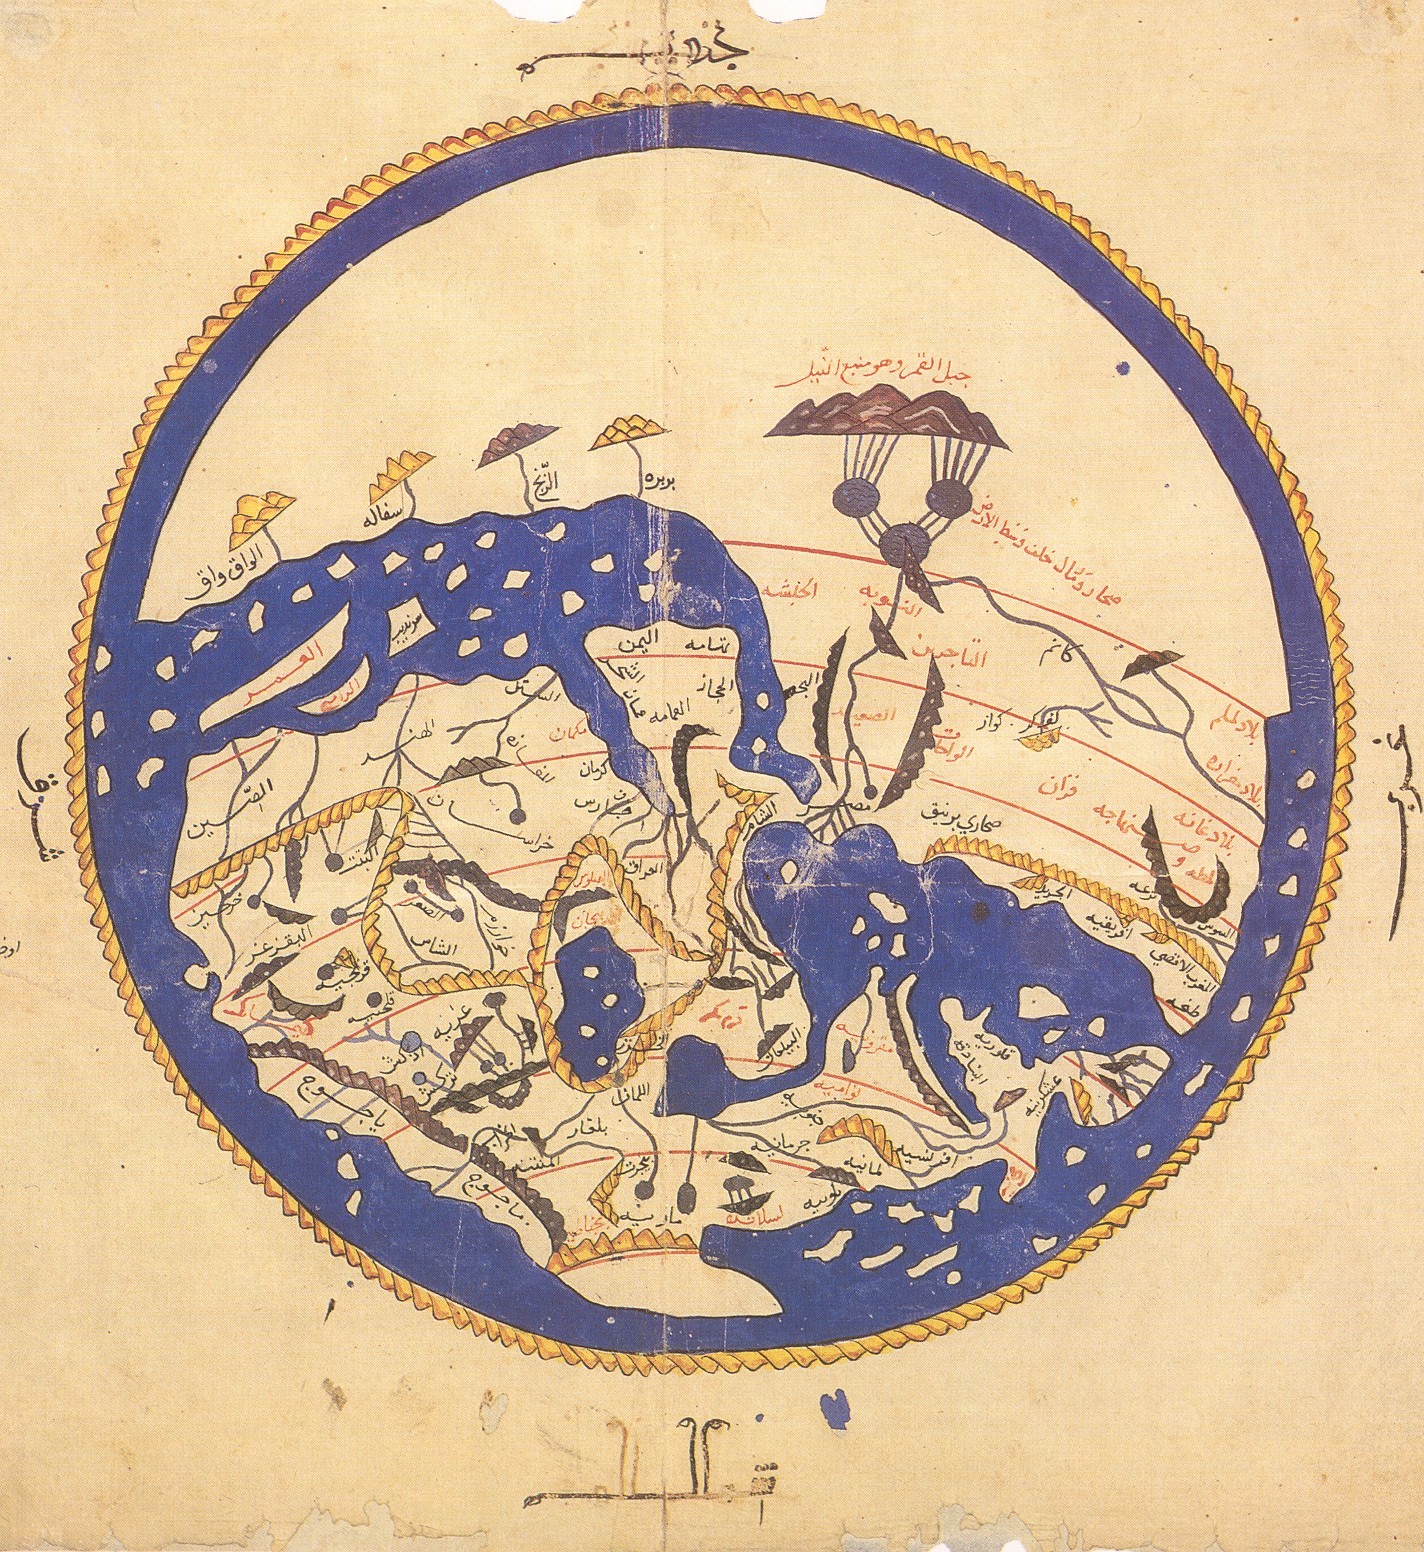 The overview map from the Bodleian MS of al-Idrisi's Geography, from Wikimedia Commons (much larger version linked beneath)